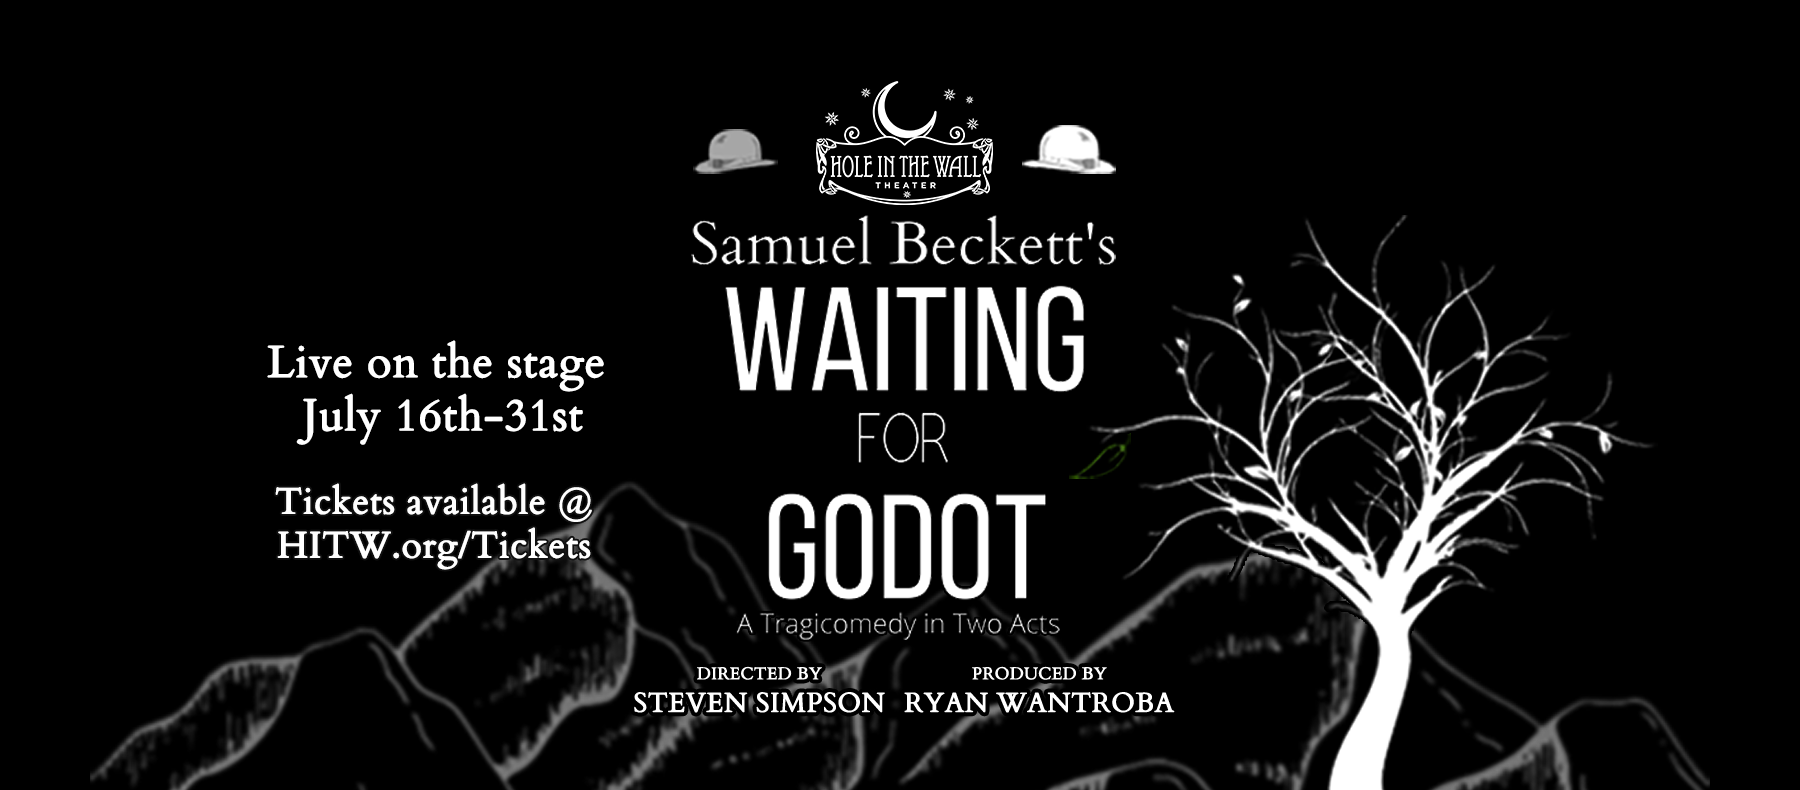 Waiting for Godot – Meet the Director